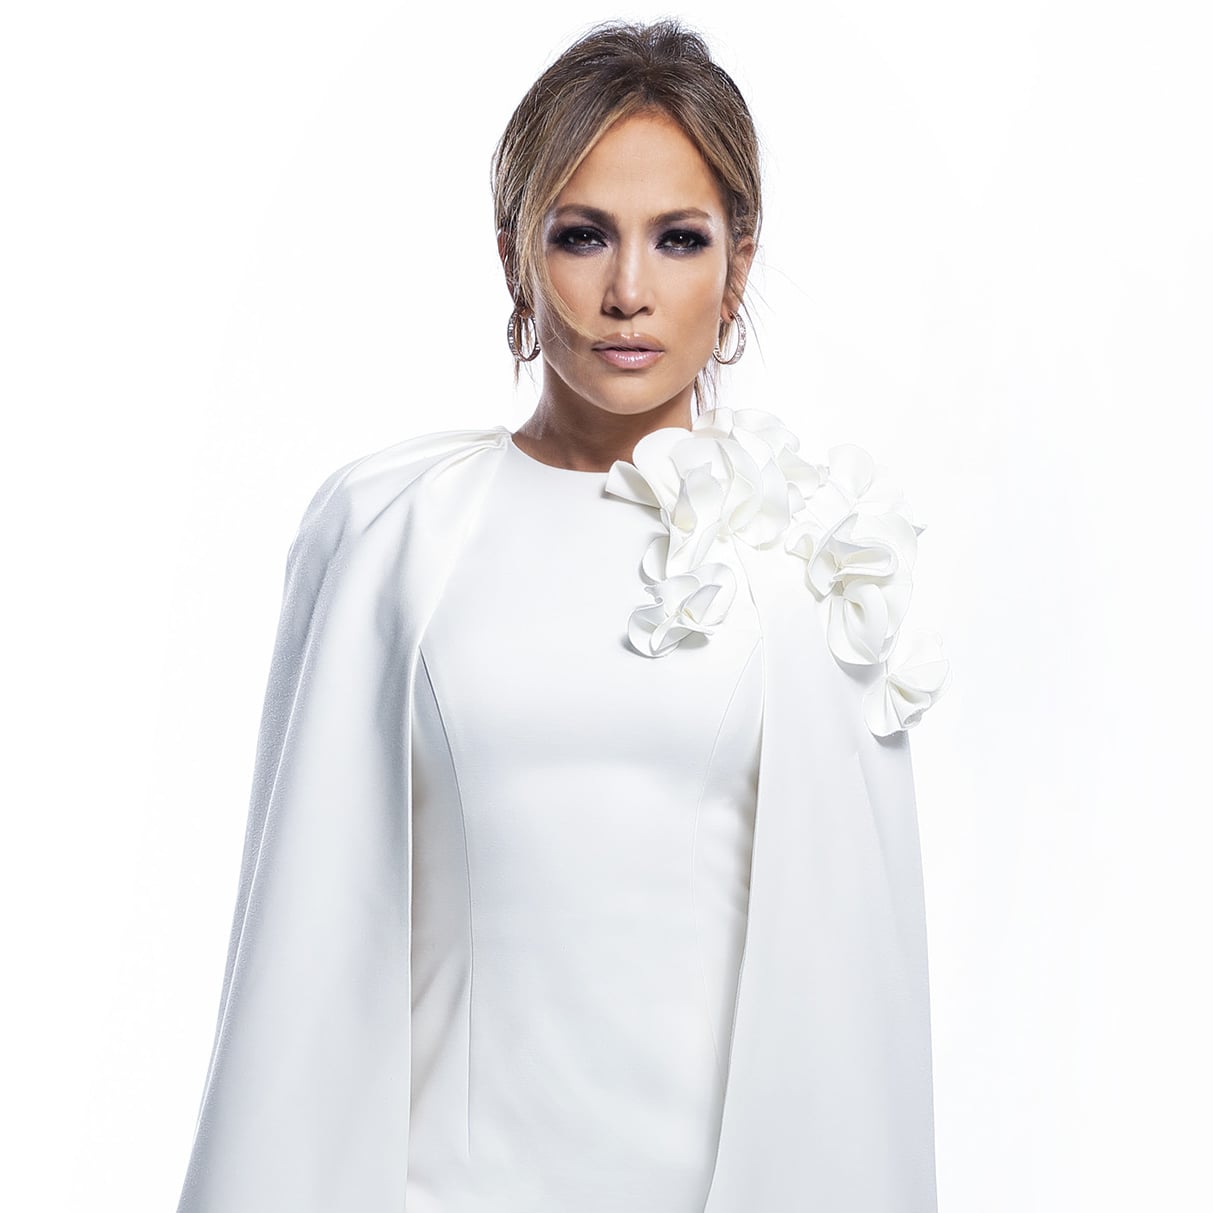 J Lo's White Button Tunic Dress With Thigh Slit From Staud